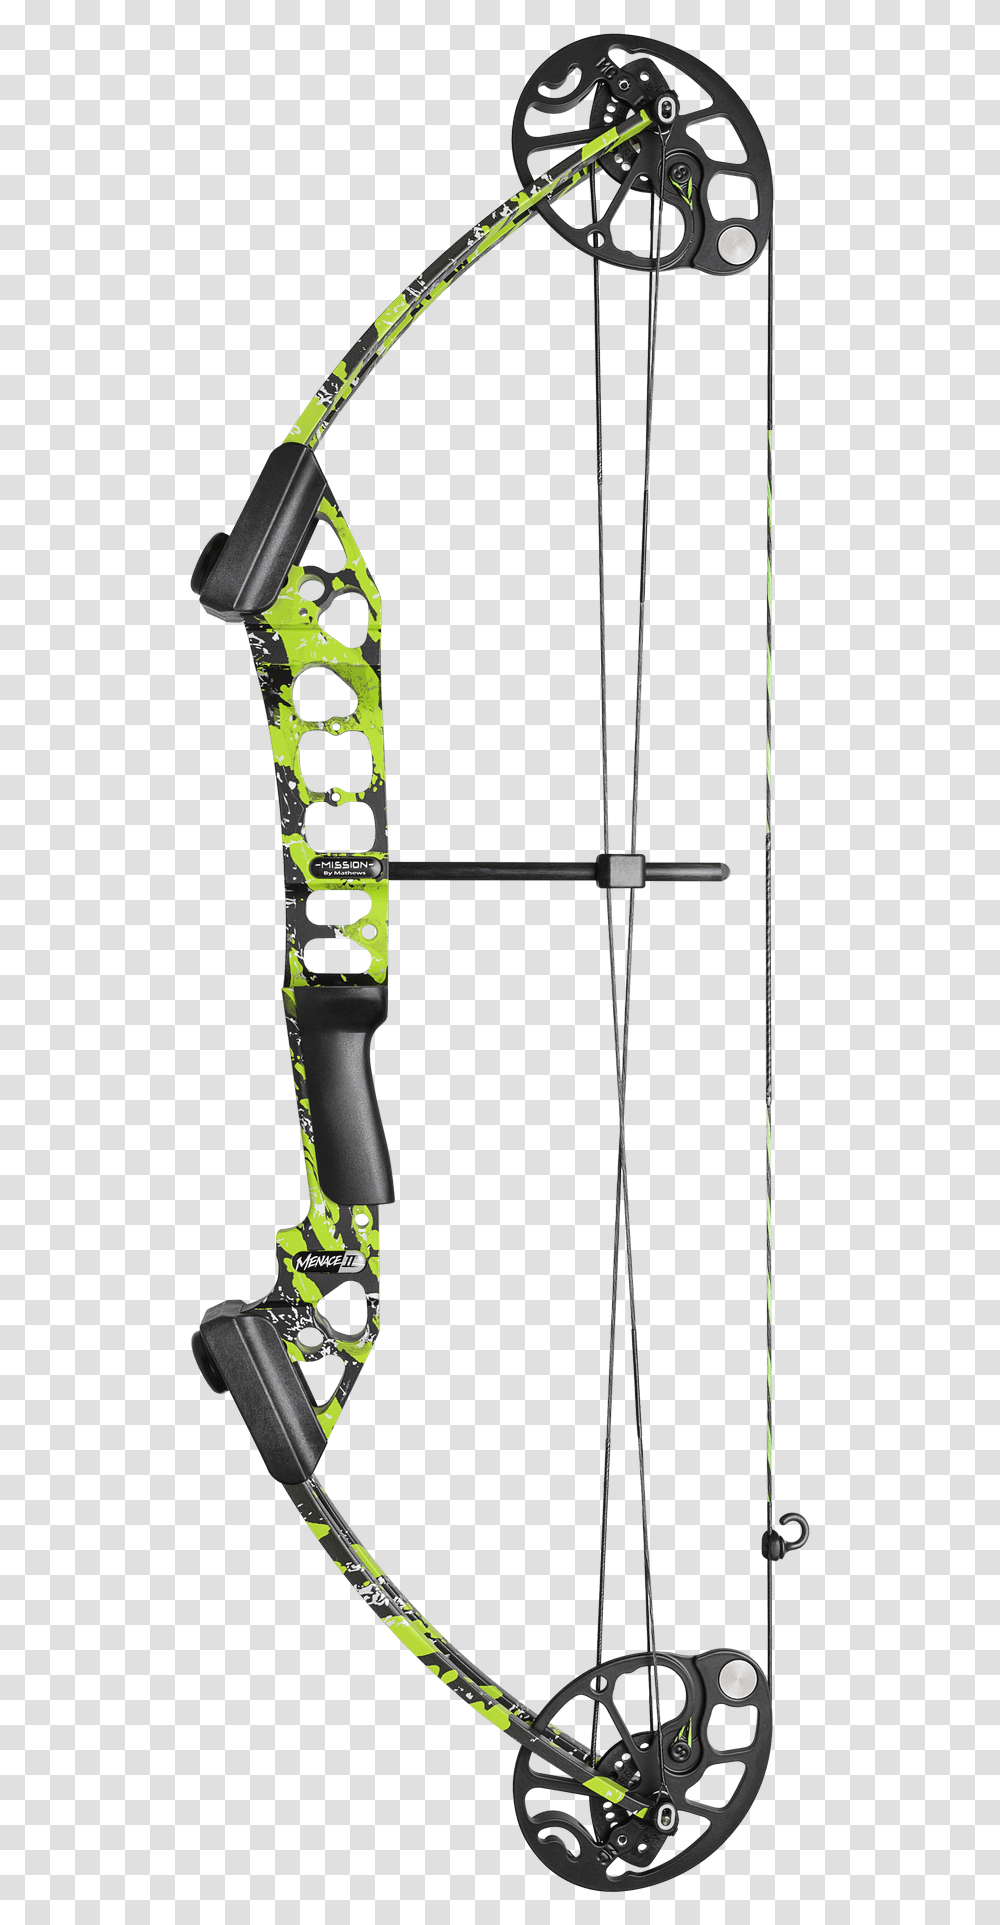 New Bow Models Introduced To Mission Line By Mathews Mia Bow, Arrow, Symbol, Shower Faucet, Brick Transparent Png